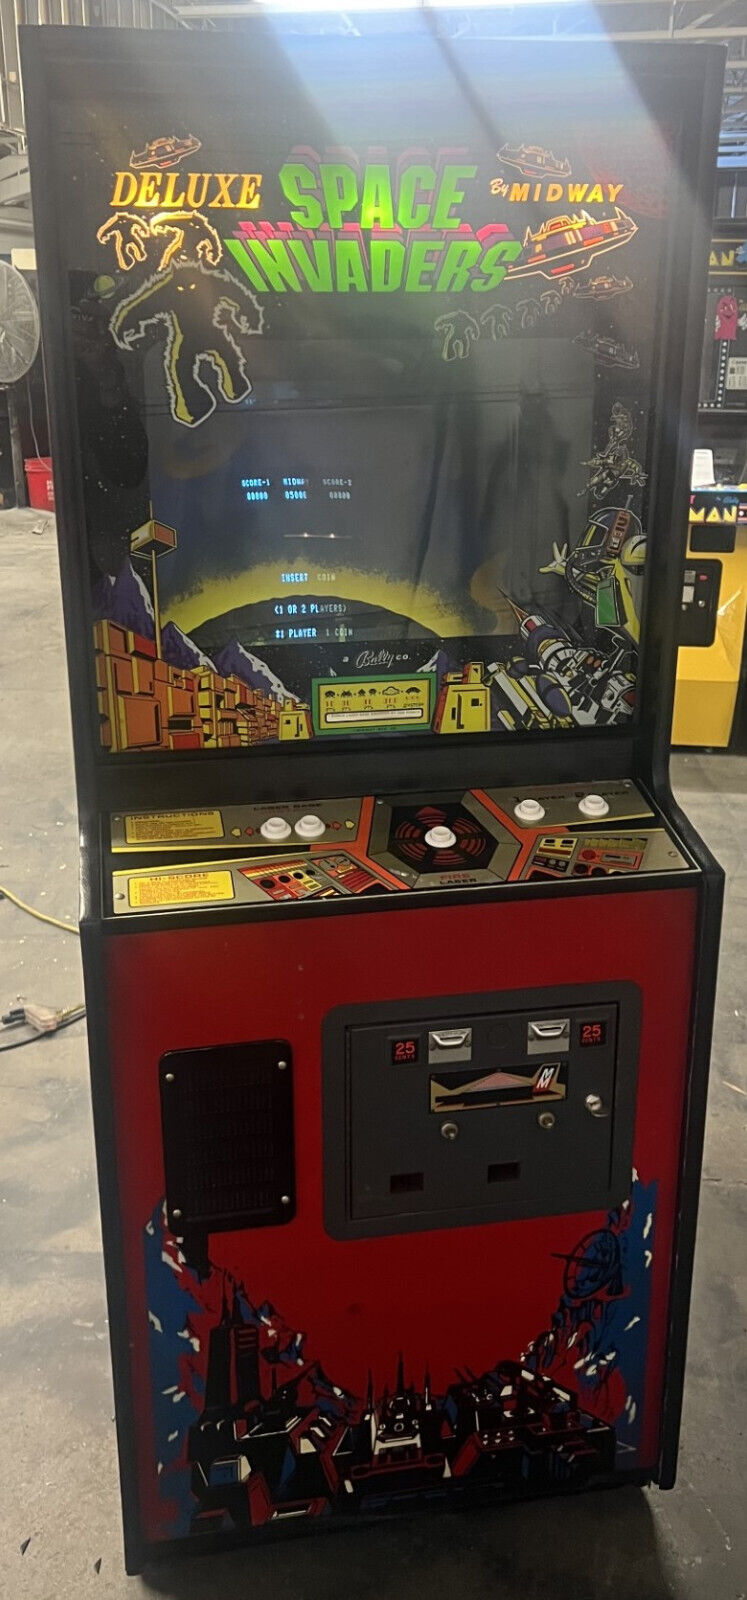 SPACE INVADERS DELUXE ARCADE MACHINE by MIDWAY 1980 (Excellent Condition) *RARE*